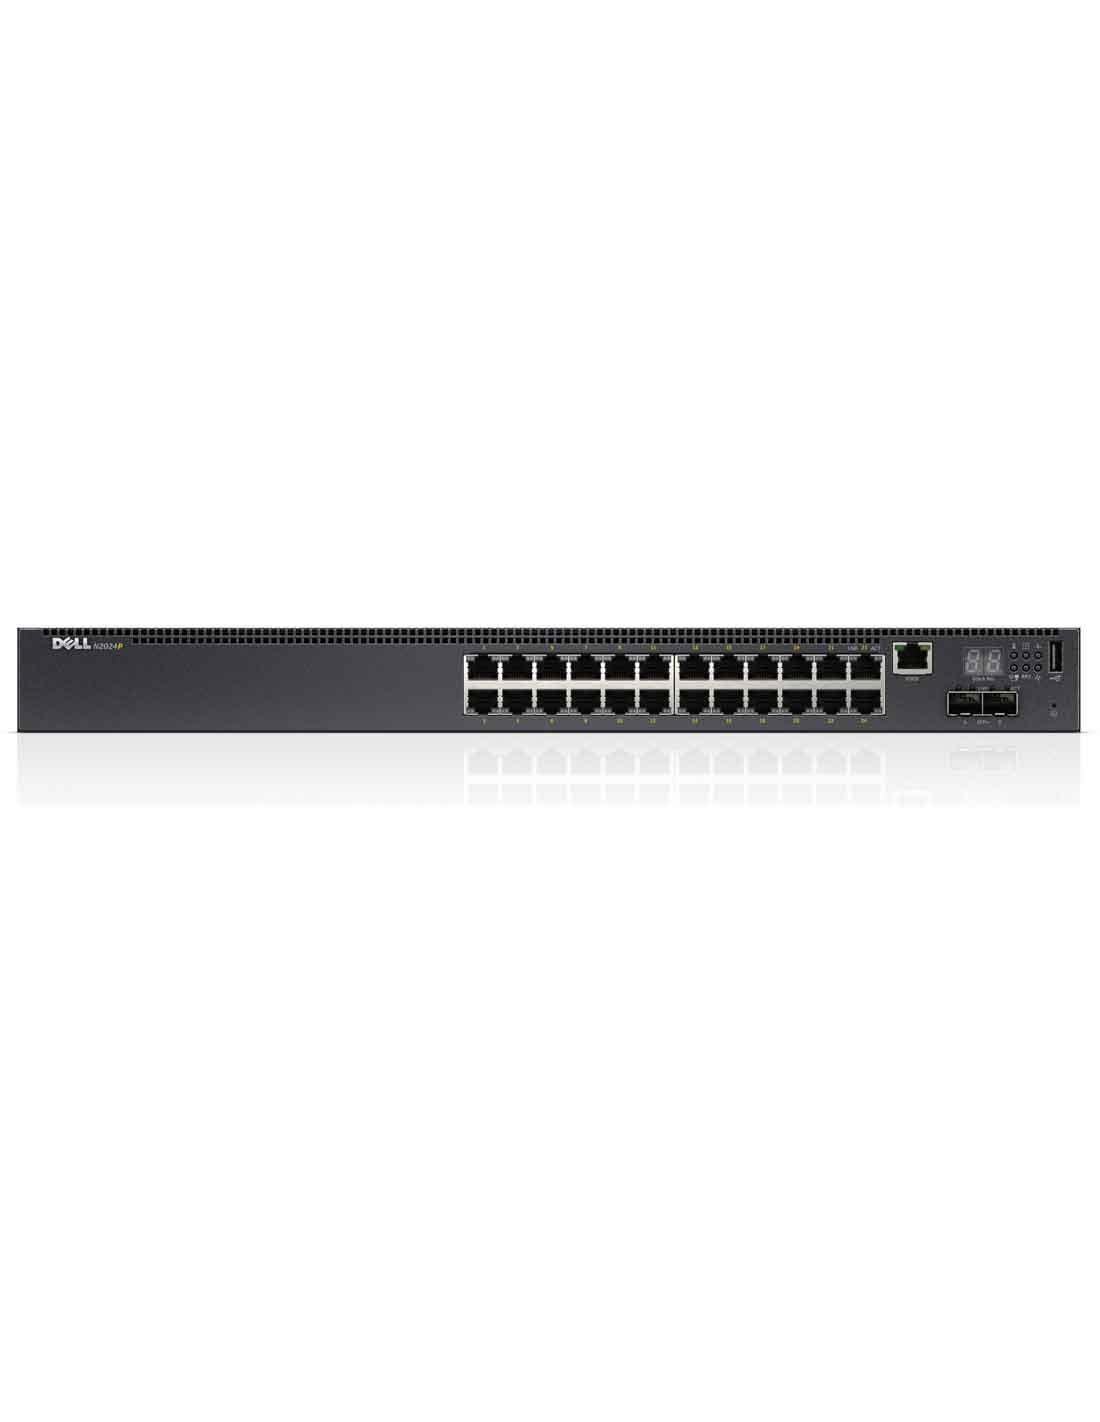 Dell N2024P Switch at the cheapest price and fast free delivery in Dubai UAE